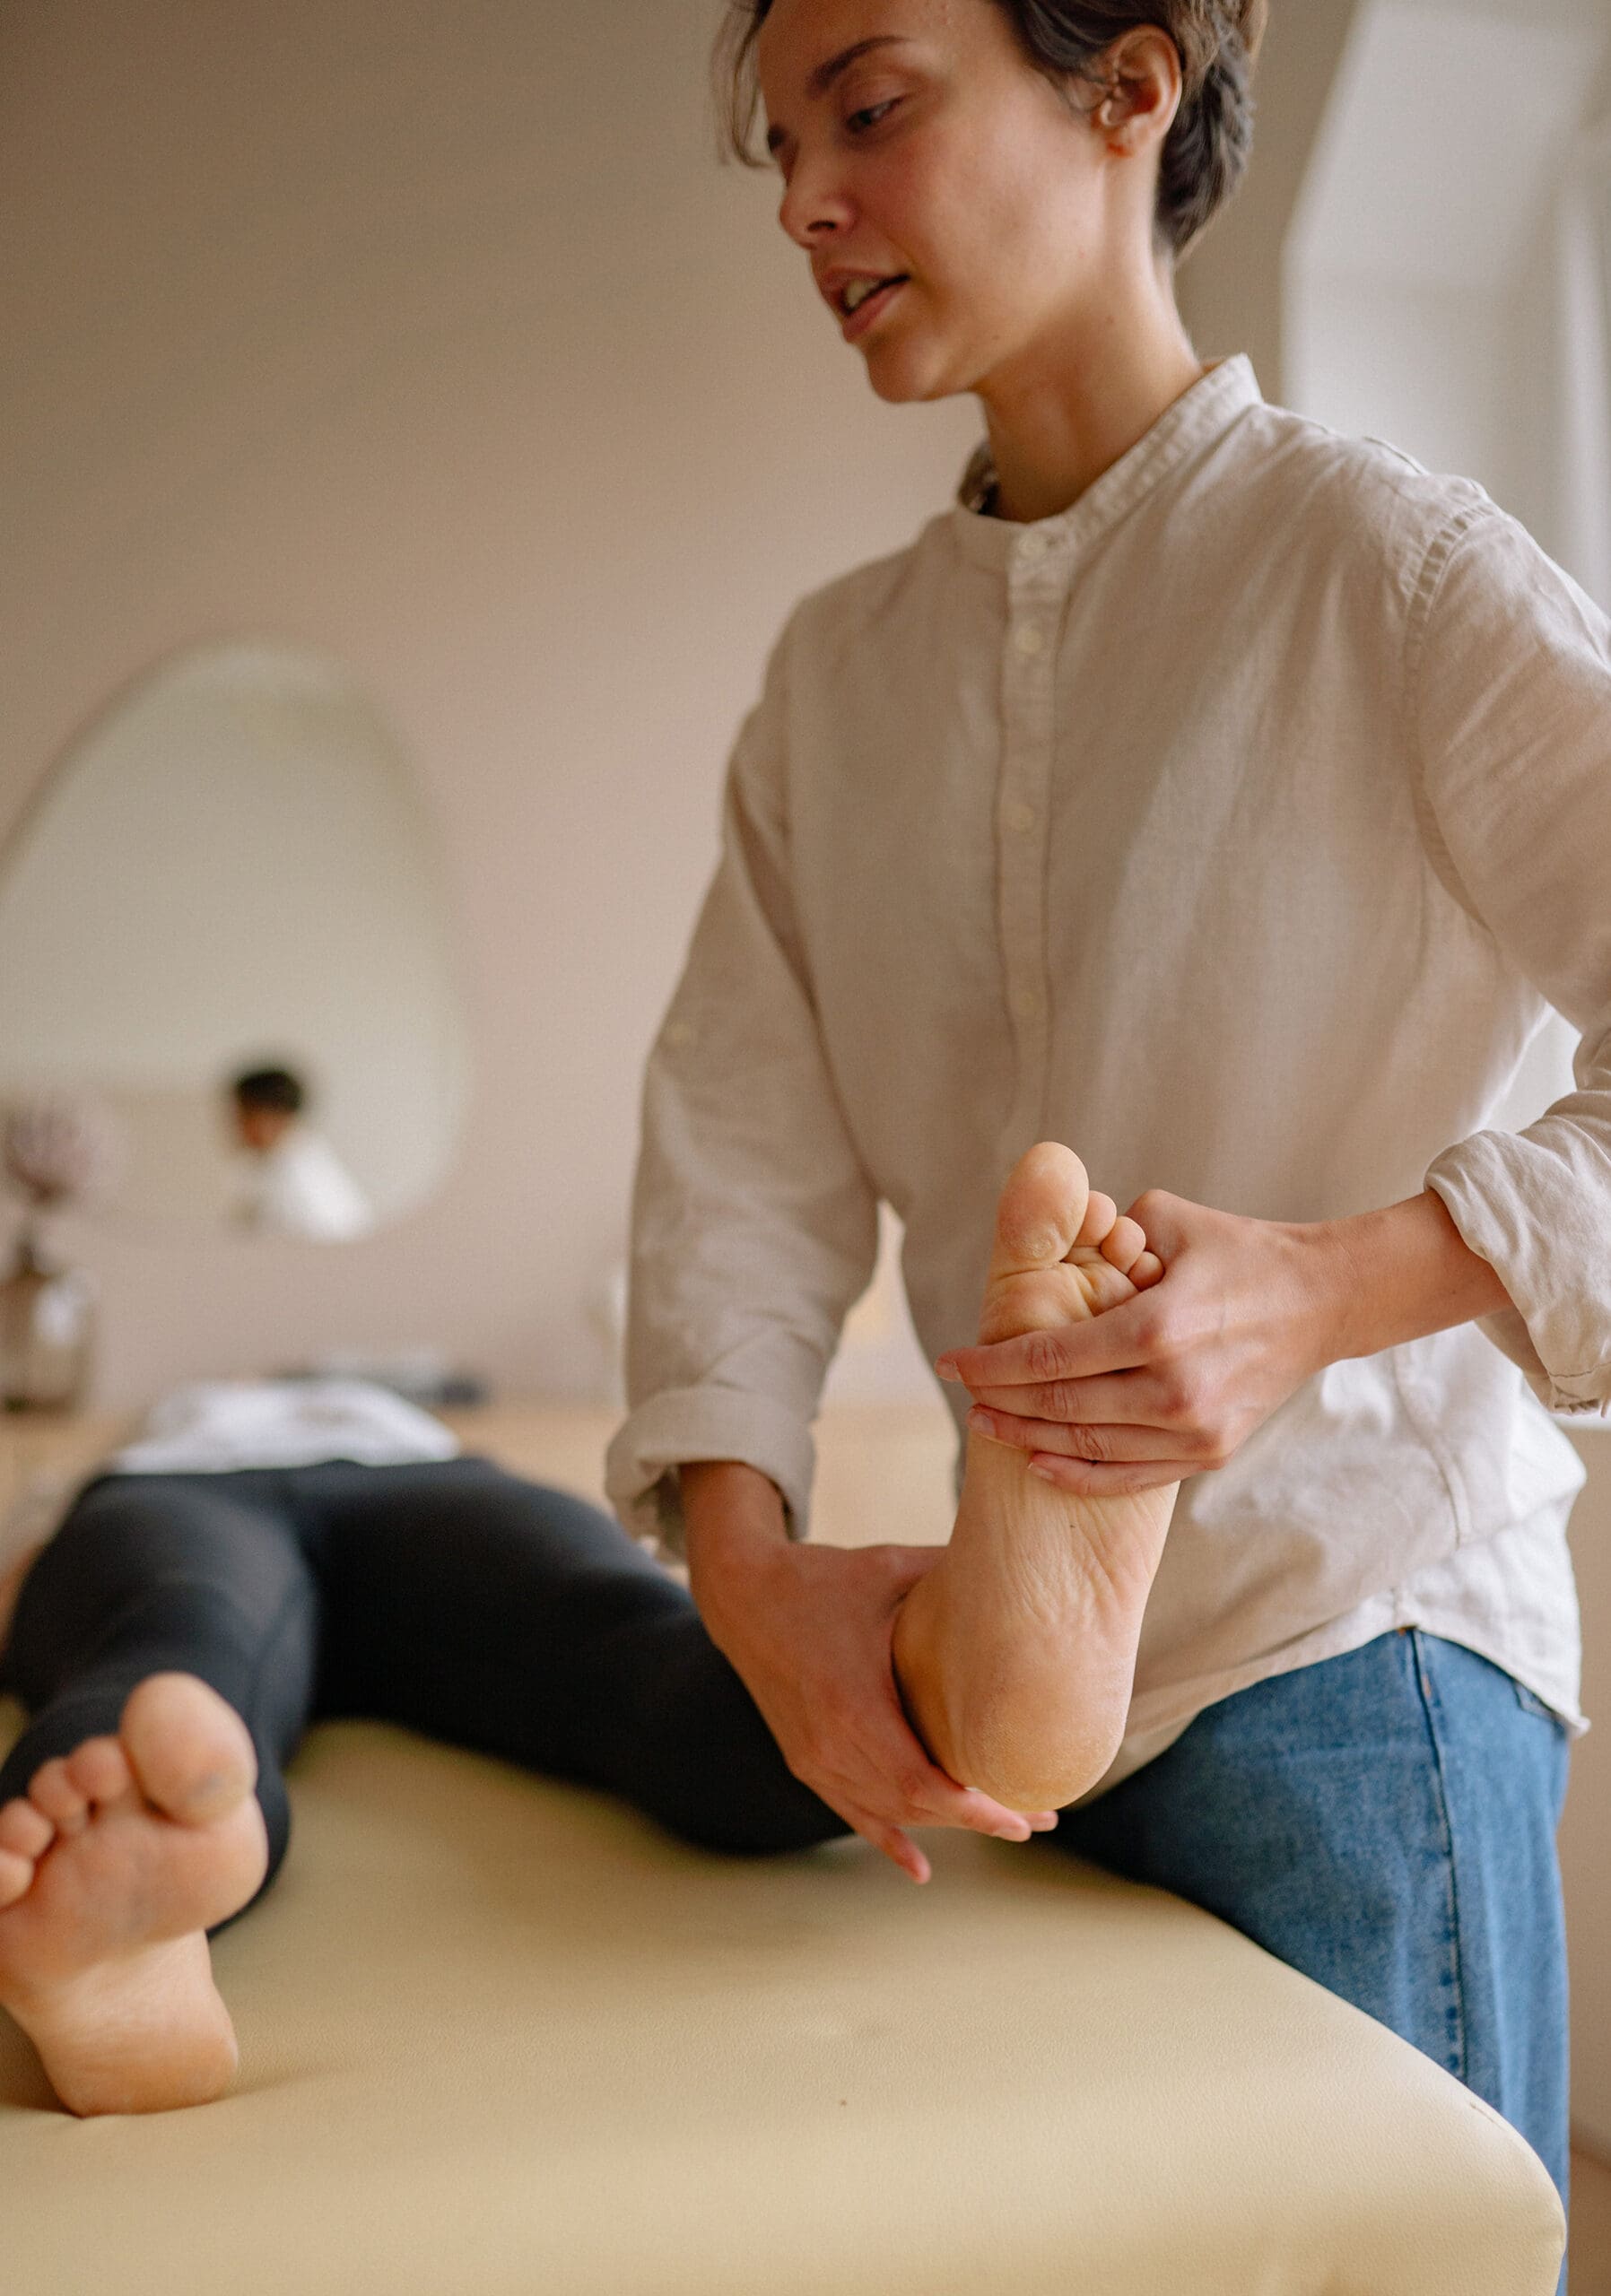 Woman doing physical therapy on foot and ankle